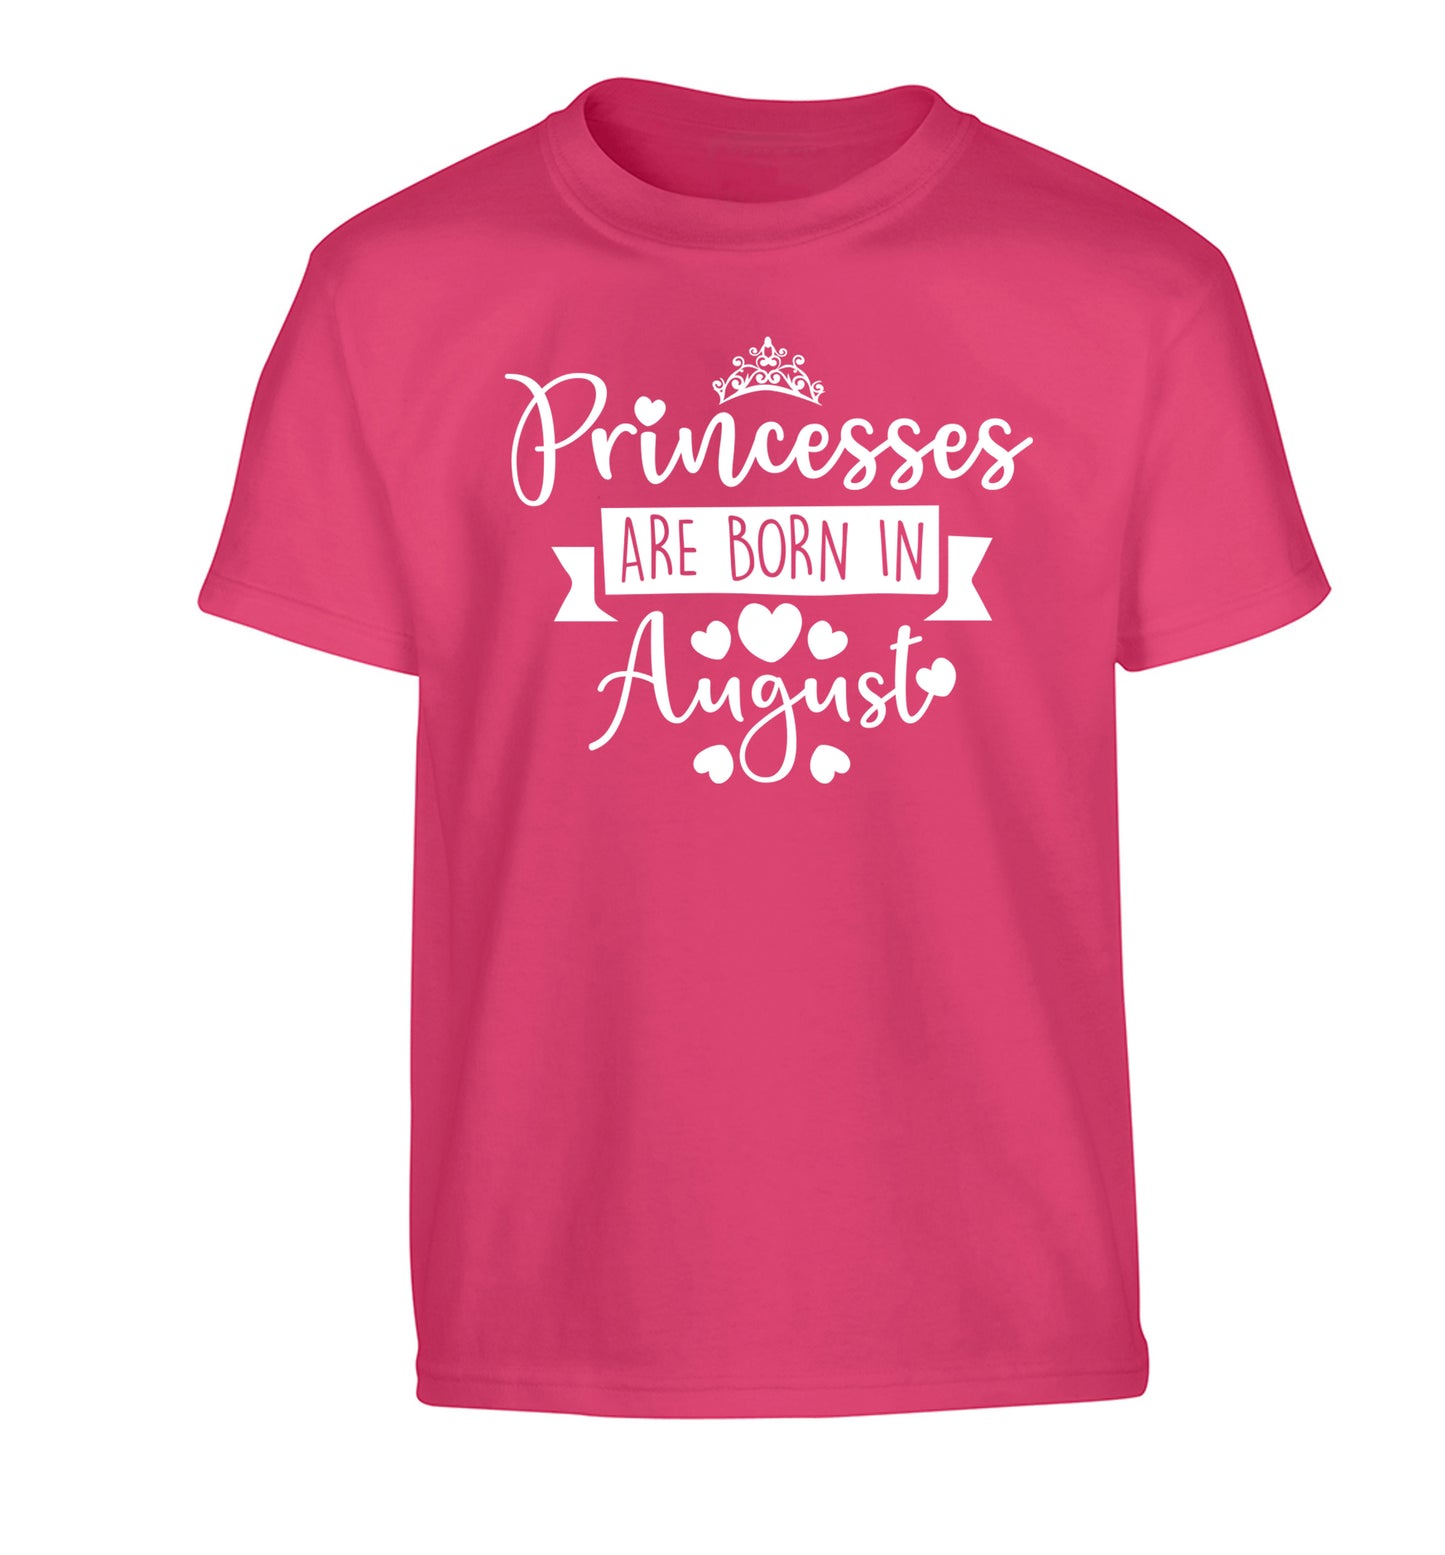 Princesses are born in August Children's pink Tshirt 12-13 Years